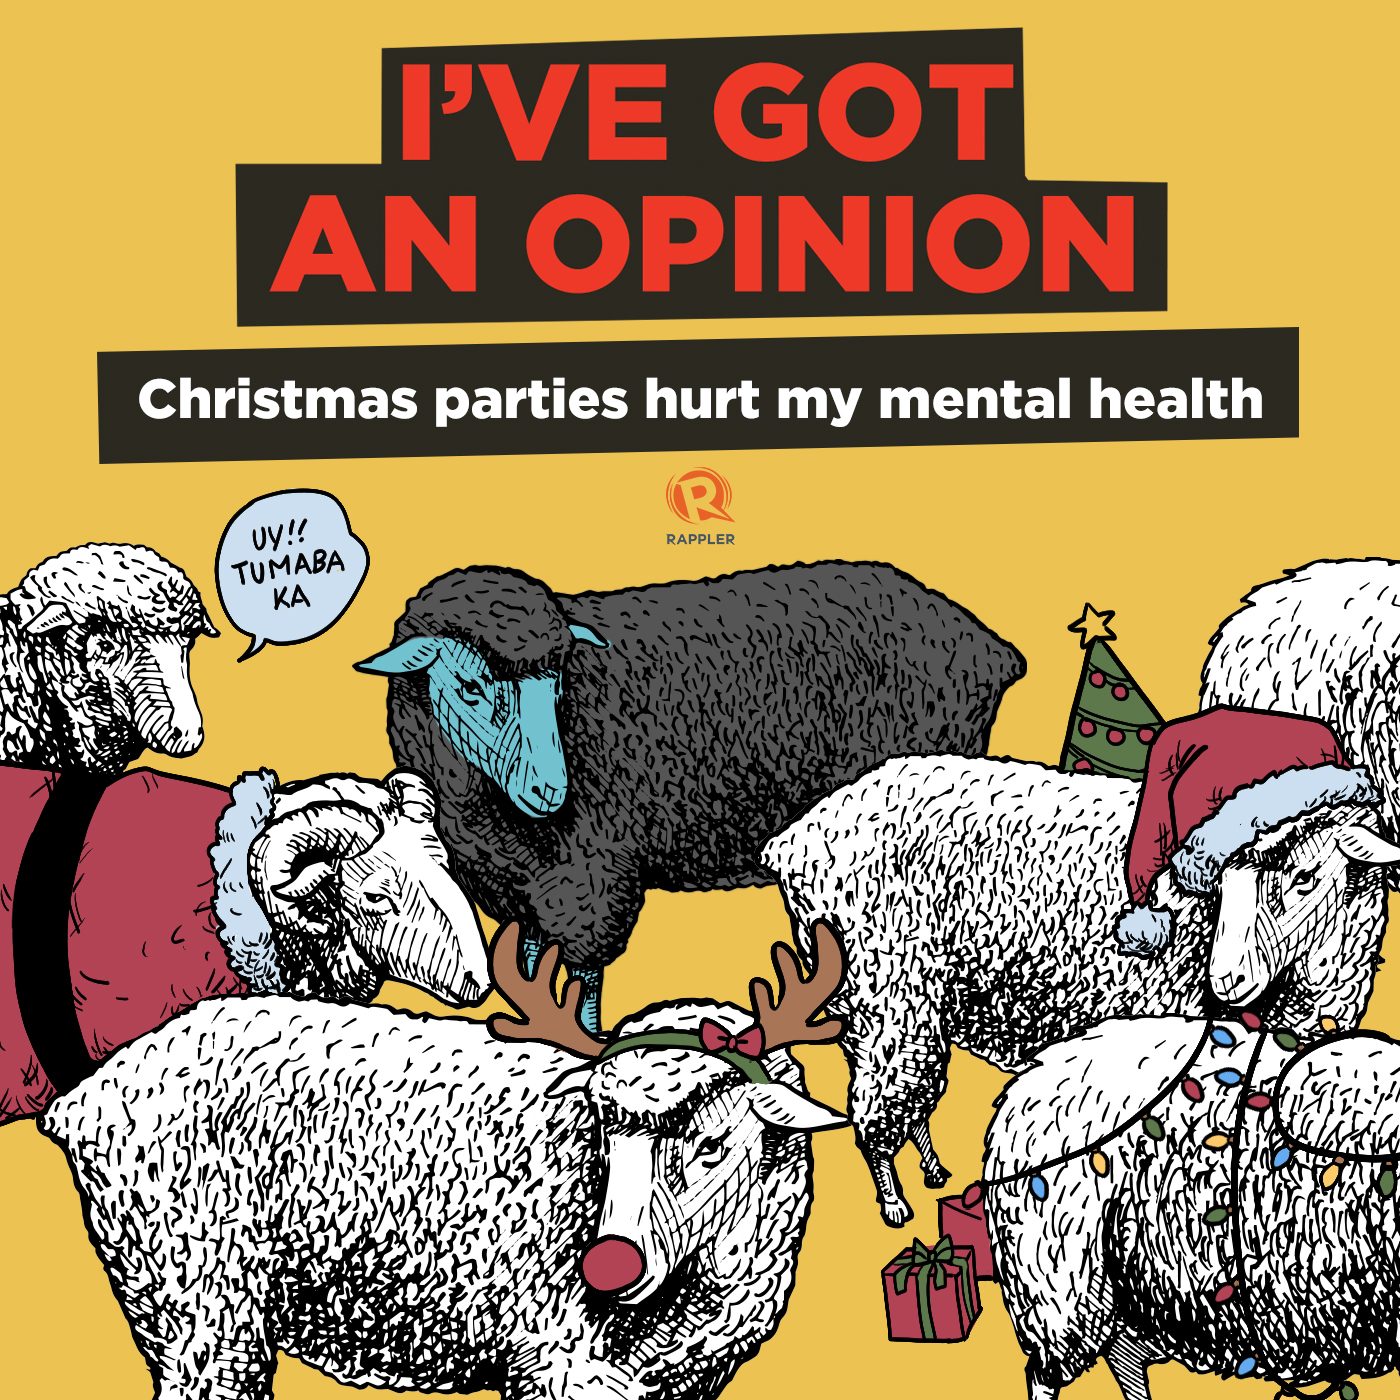 [PODCAST] I’ve Got An Opinion: Christmas parties hurt my mental health